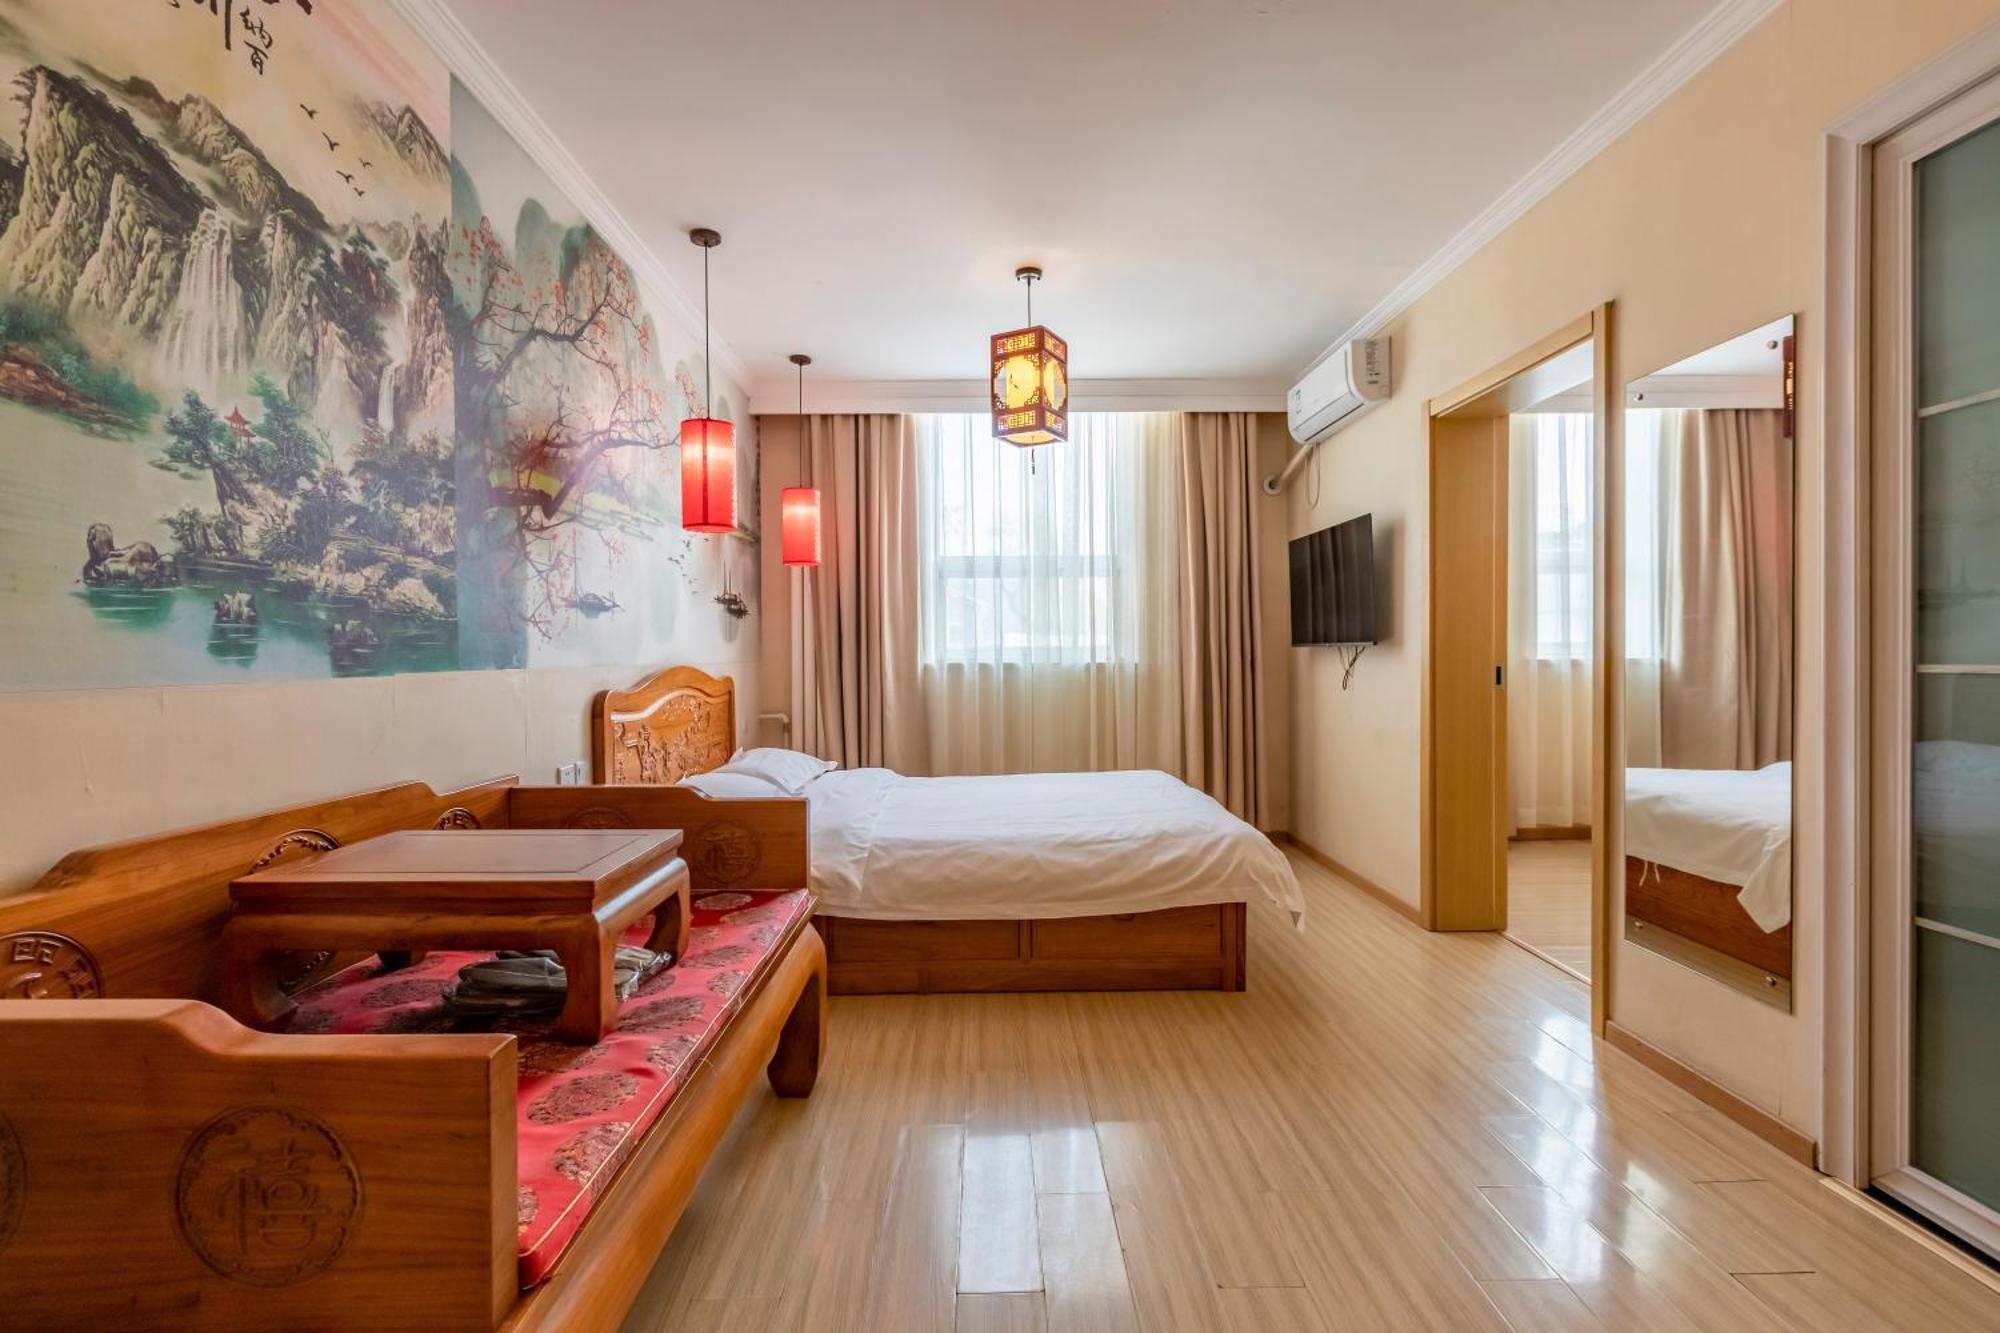 Happy Dragon Alley Hotel-In The City Center With Big Window&Free Coffe, Fluent English Speaking,Tourist Attractions Ticket Service&Food Recommendation,Near Tian Anmen Forbiddencity,Near Lama Temple,Easy To Walk To Nanluoalley&Shichahai 베이징 외부 사진